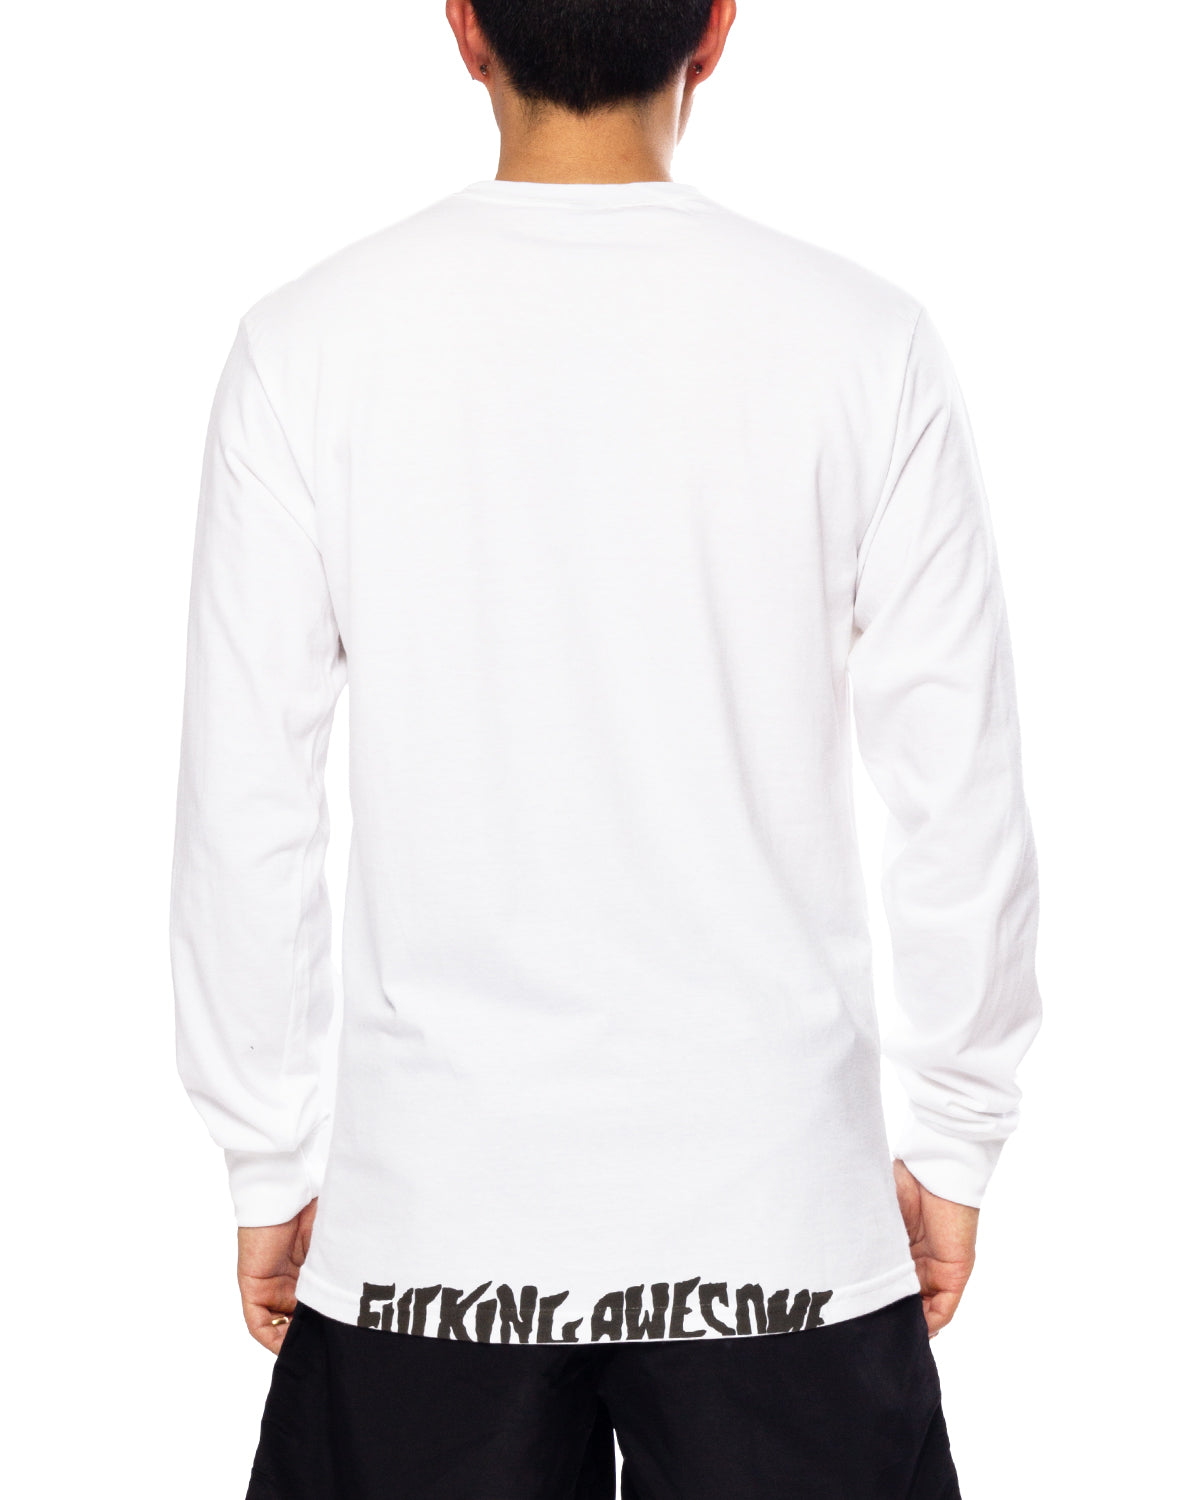 Tipping Point Long Sleeve Tee